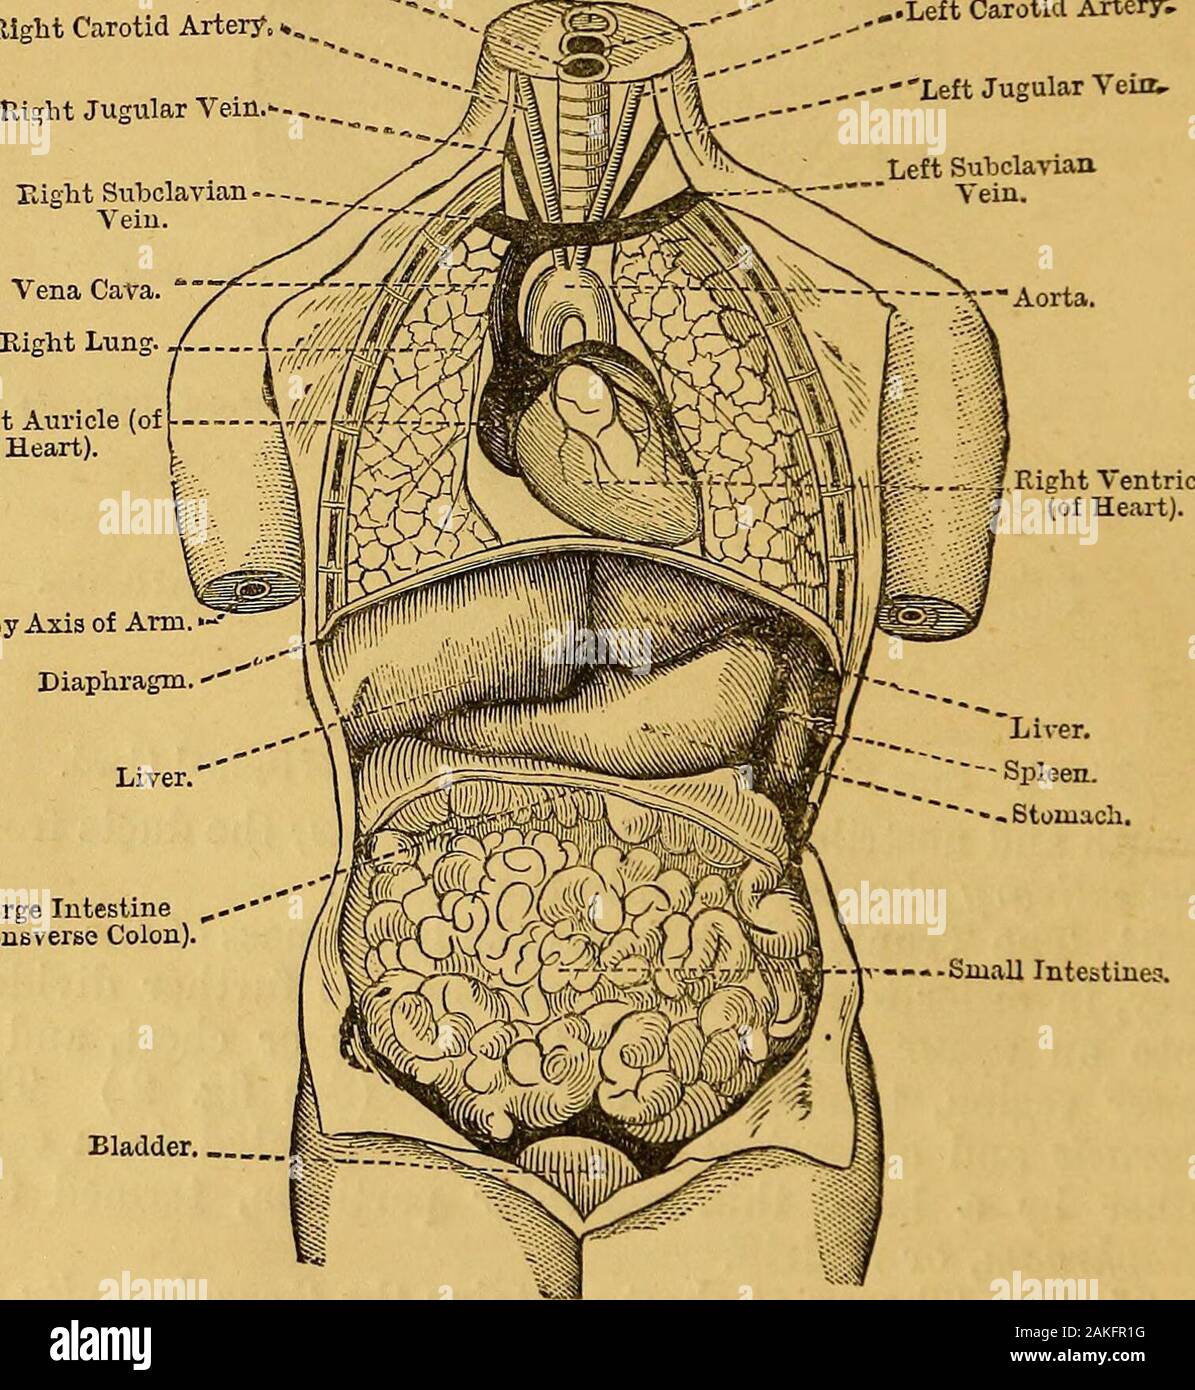 Elements of animal physiology, chiefly human . ed from eachother by a large thin muscular partition, termed thediaphragm, or midriff. 35. The Thorax or chest contains the thoracic cavity, inwhich are lodged the heart, lungs, trachea, and portionsof several of the larger blood-vessels (the aorta, vena cava,and pulmonary vessels), and the dorsal portions of thespinal cord, and of the bony axis by which it is protected,also a portion of the oesophagus (gullet or food-pipe), and 24 ANIMAL PHYSIOLOGY. tlie thoracic and, and of the sympathetic ov ganglionic-nerve-system, not shown in the diagram. Th Stock Photo